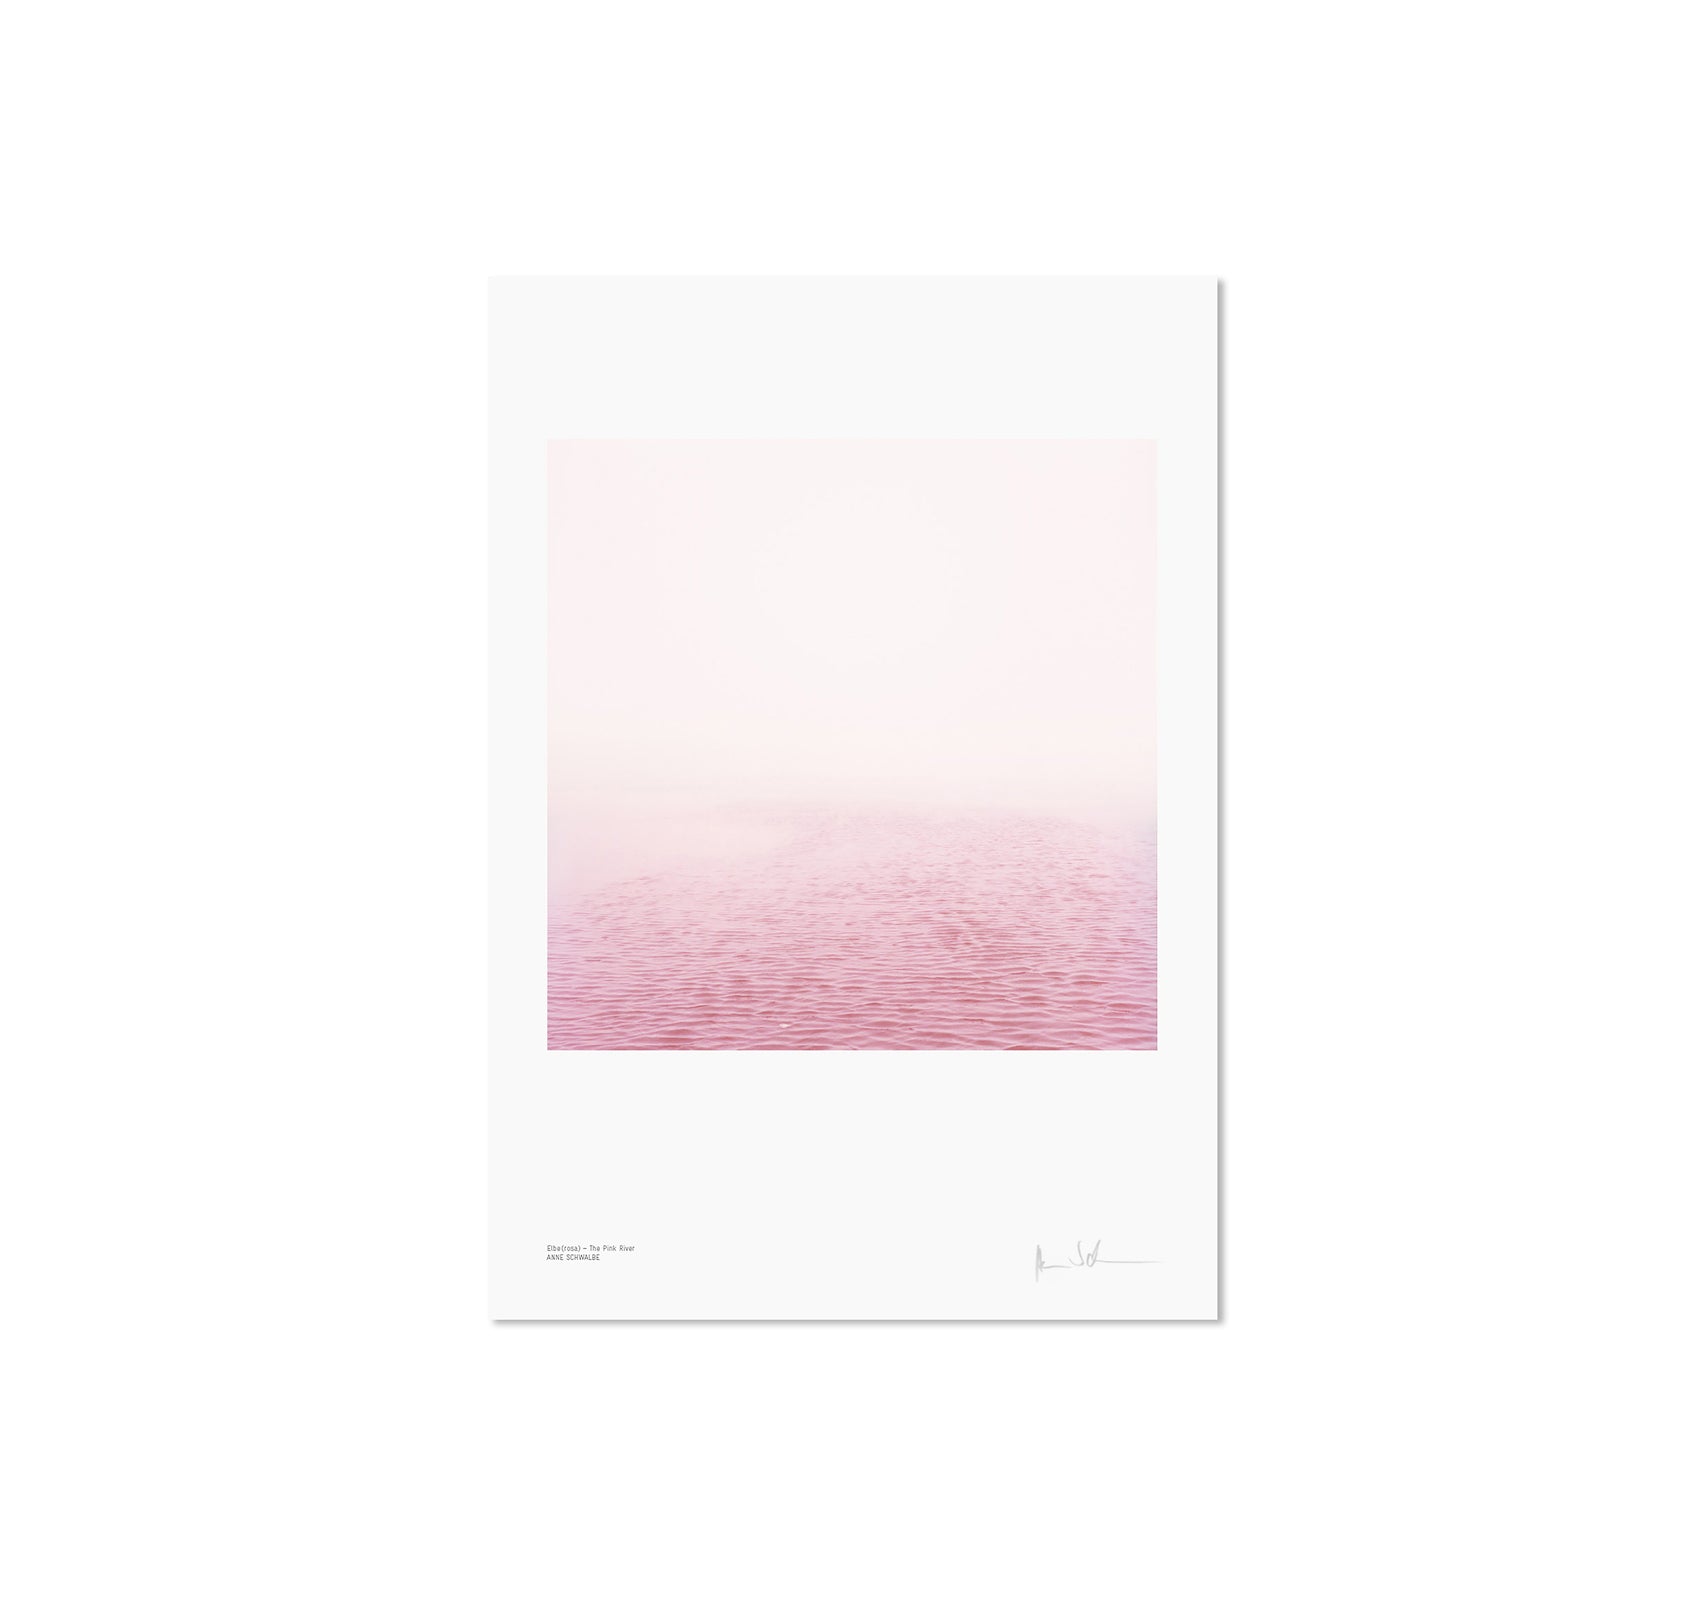 ELBE (ROSA) - THE PINK RIVER by Anne Schwalbe [SIGNED]